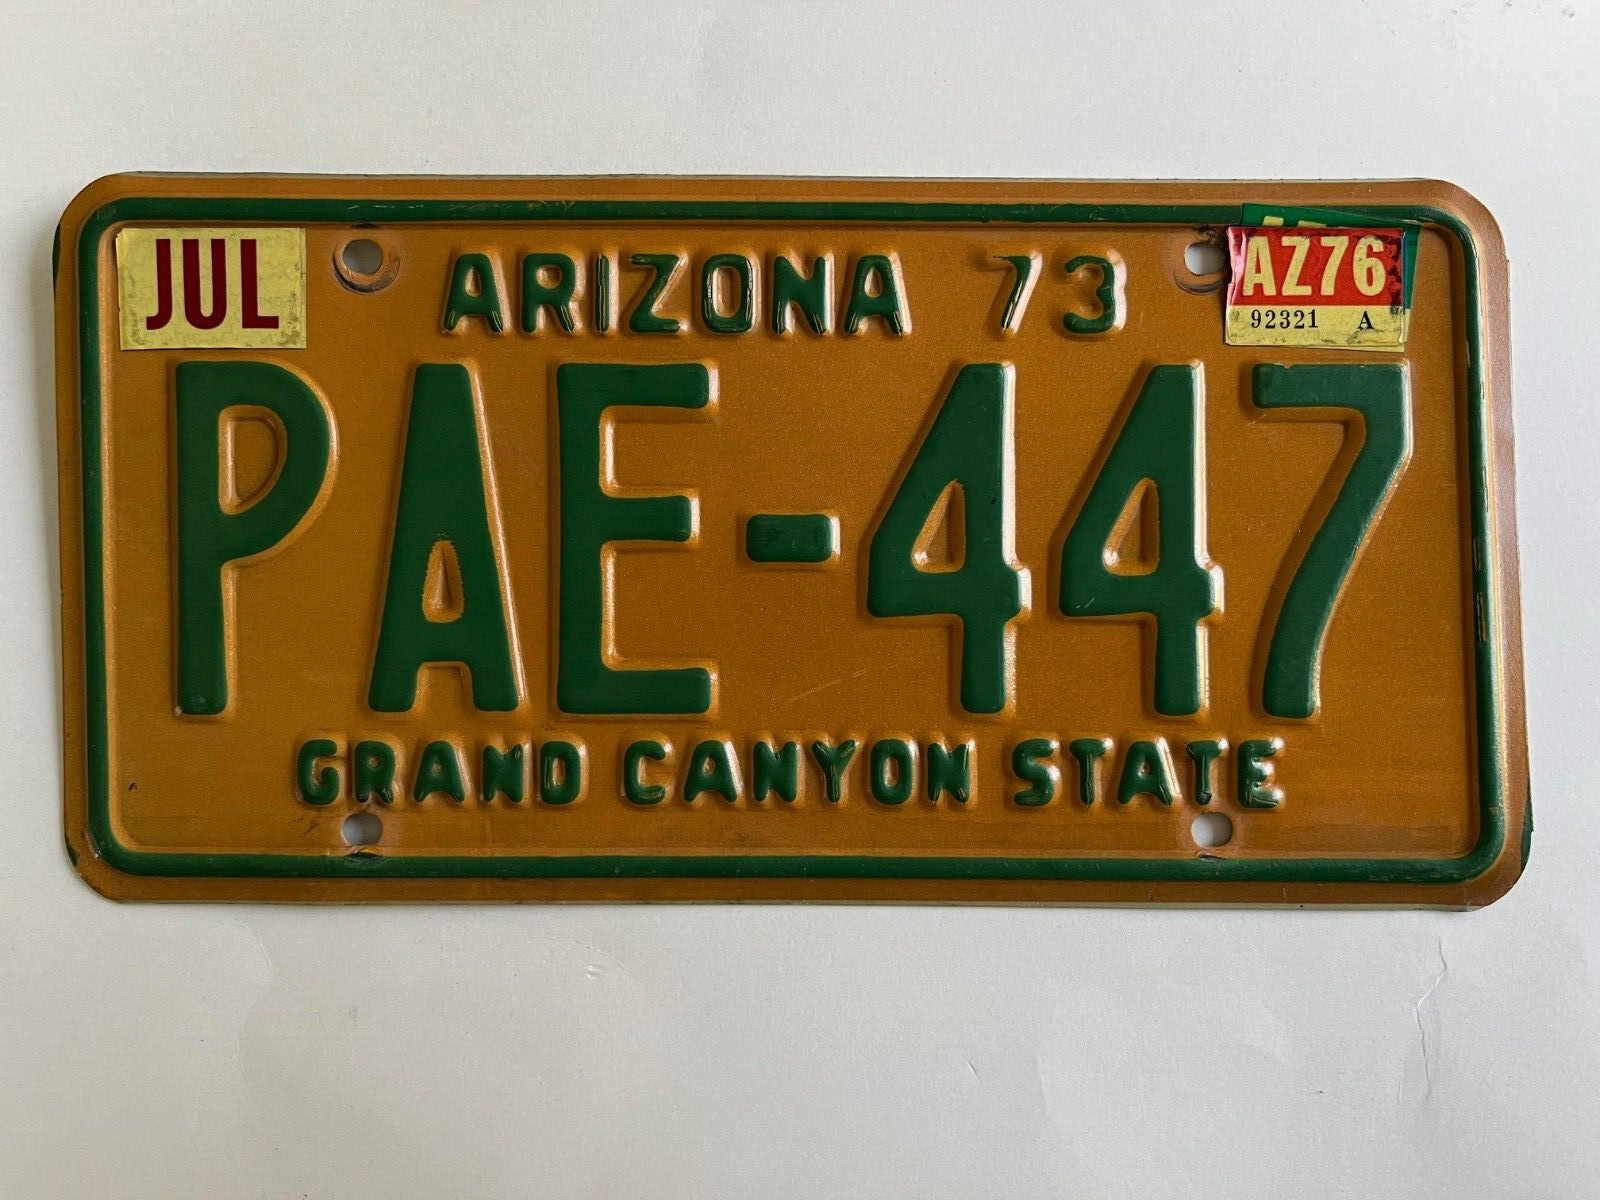 1976 Arizona License Plate Year Stickers on dated 1973 base July Bicentennial